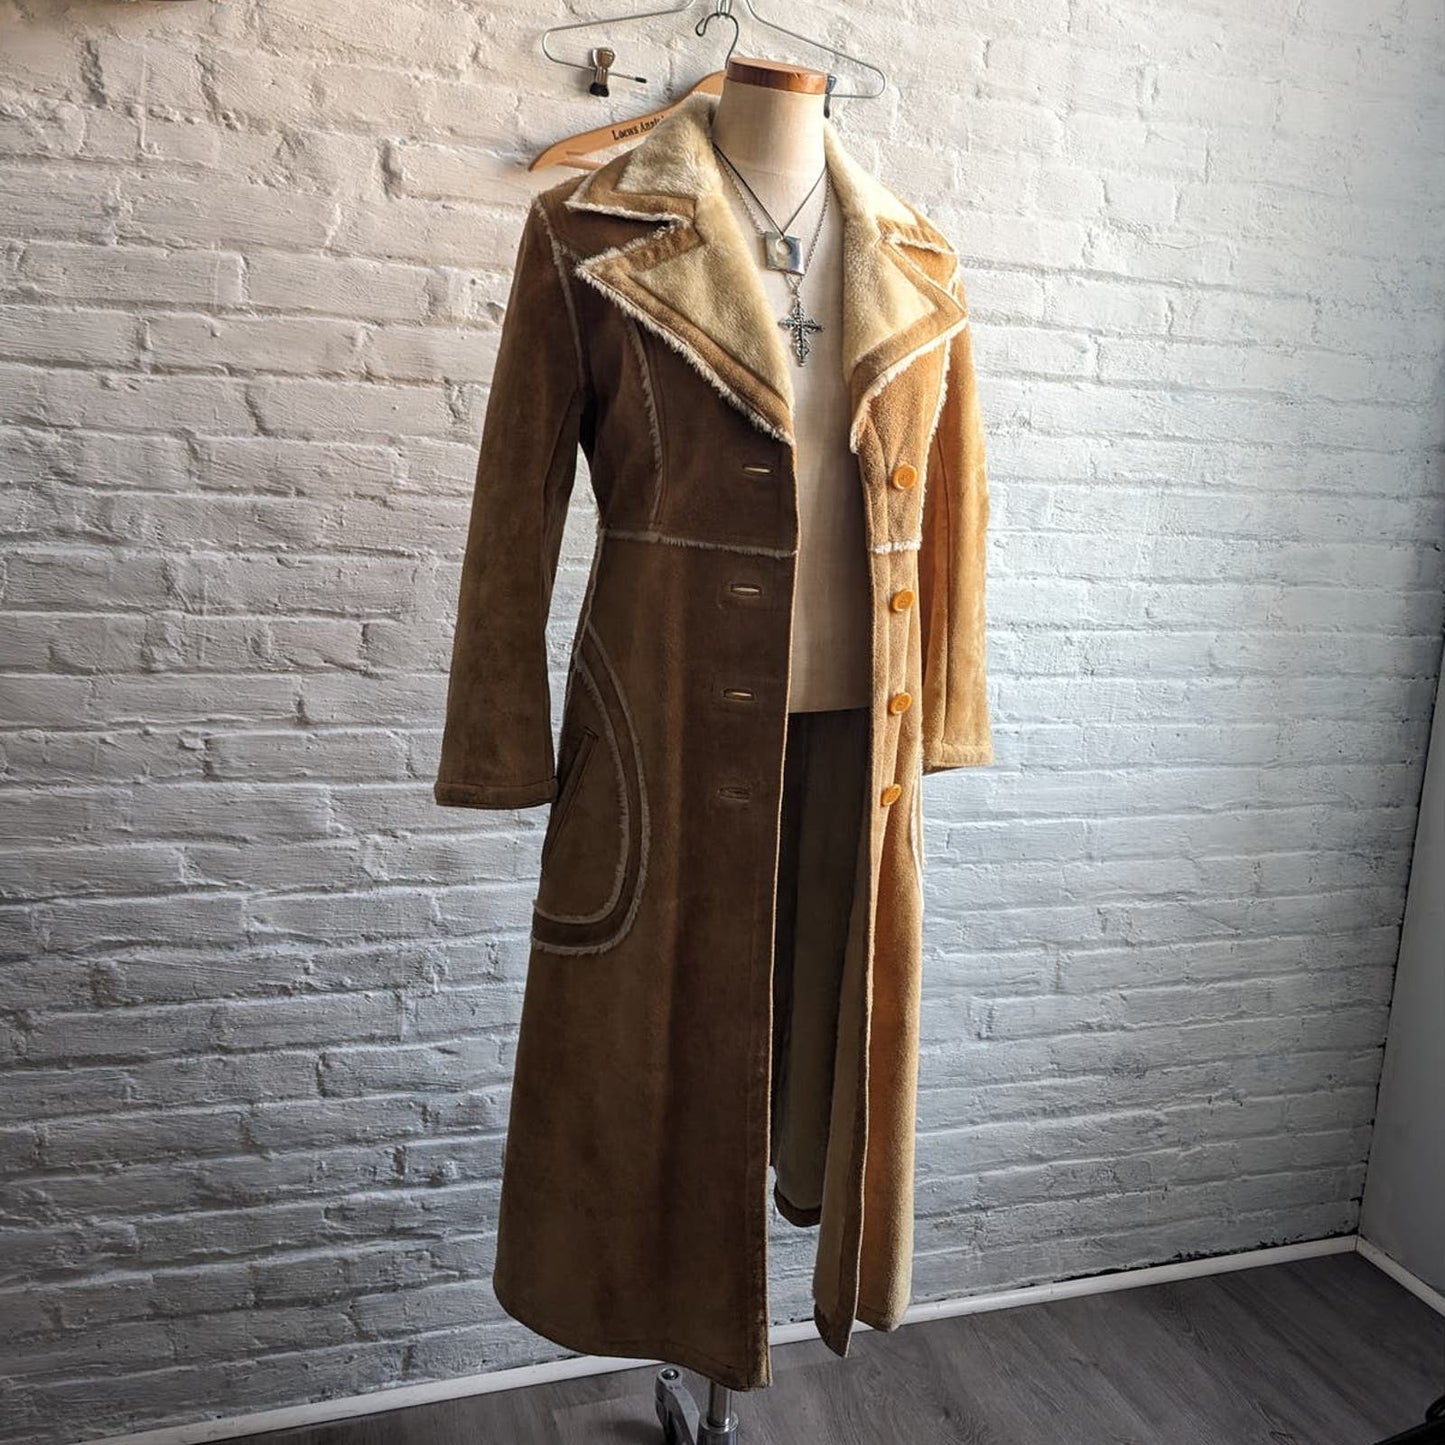 Vintage Genuine Suede Leather Penny Lane Duster Groovy Furry Trench Coat Jacket